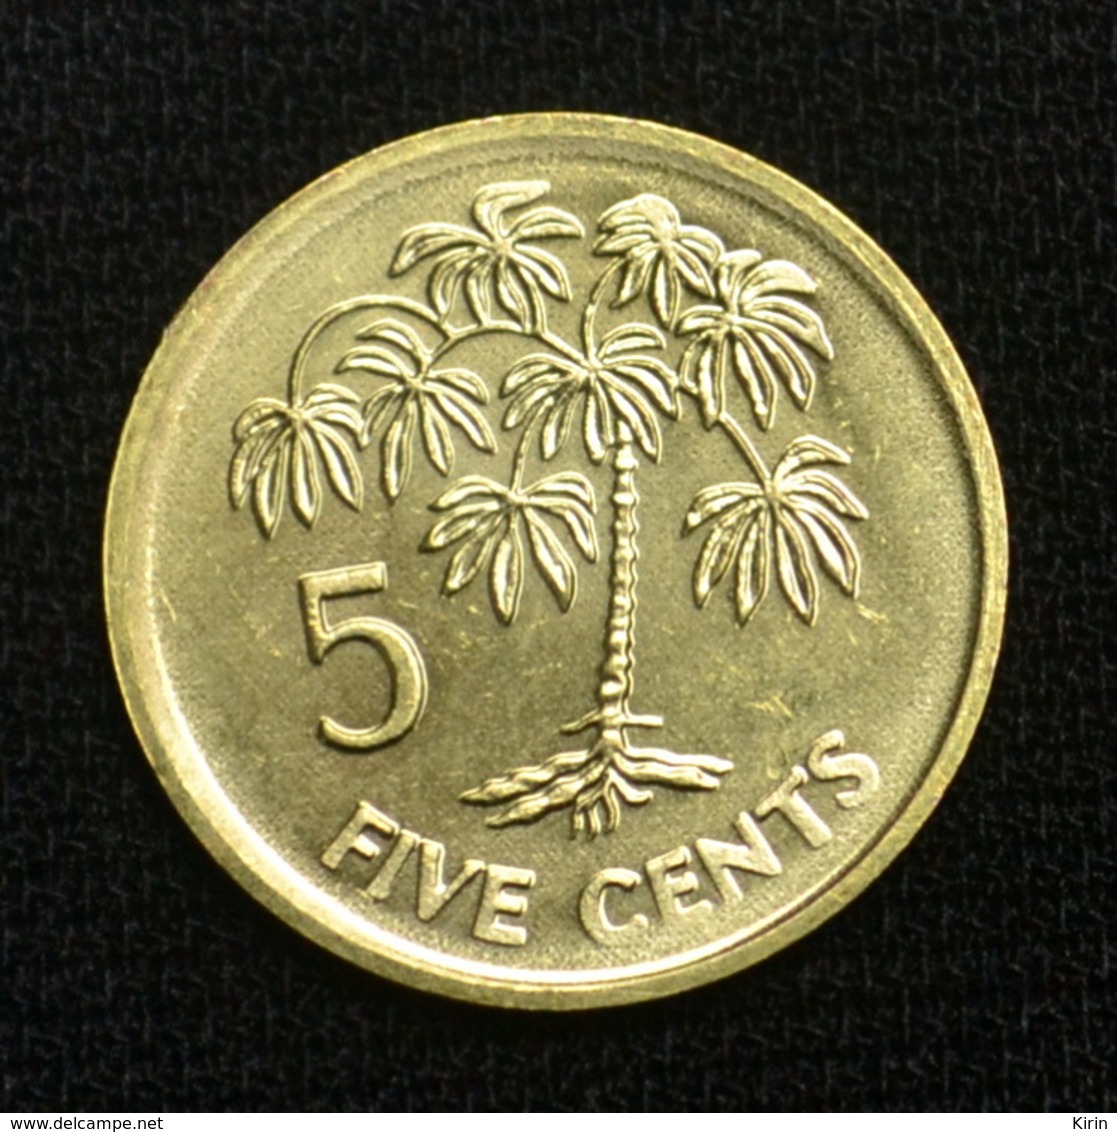 Seychelles 5 Cents (Altered Coat Of Arms) 1995 Coin Km47.2 - Seychelles